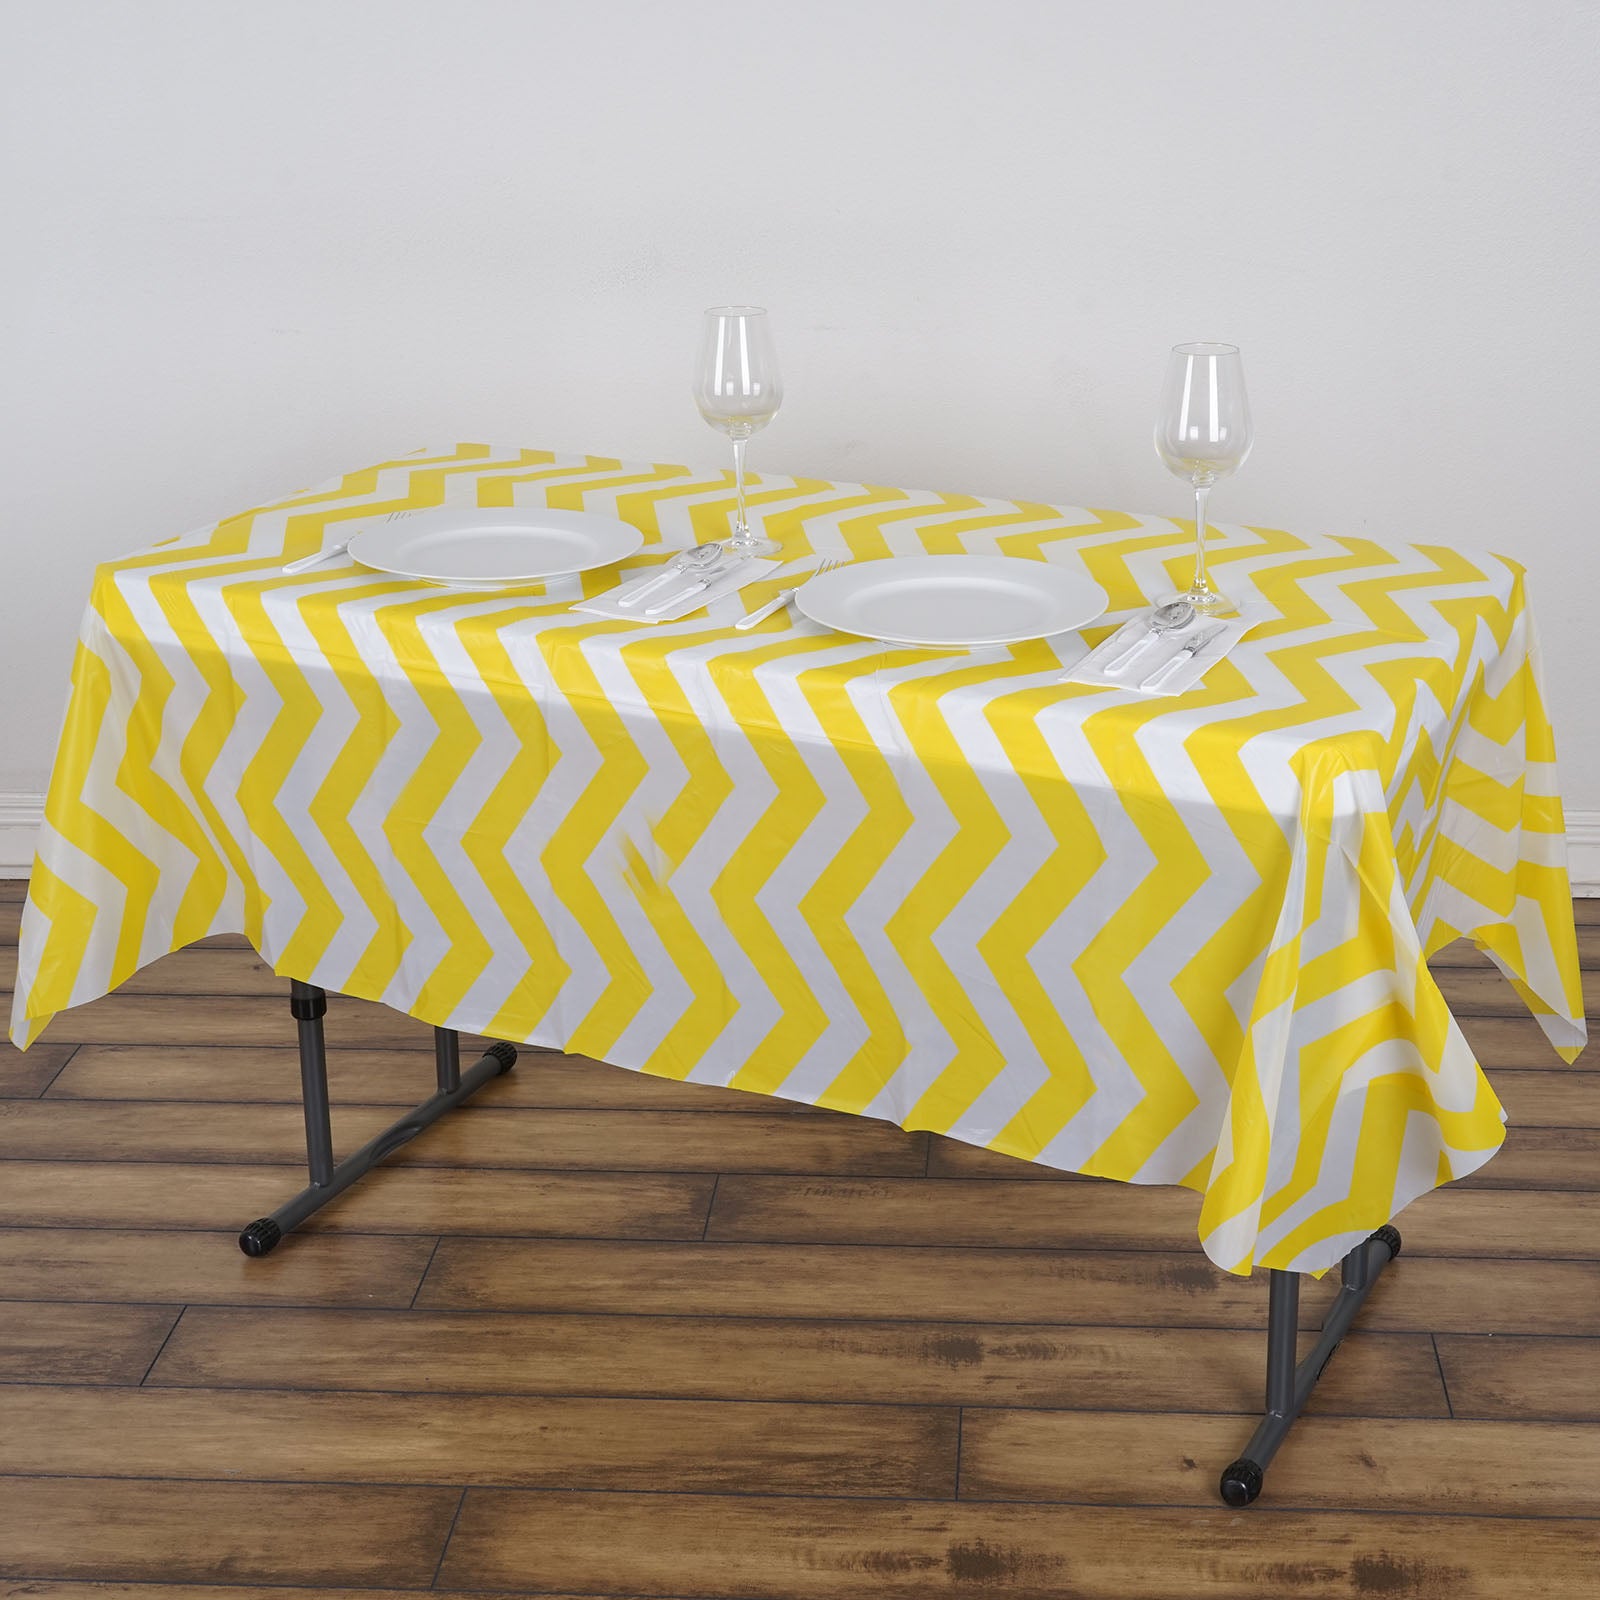 make-your-order-official-of-yellow-chevron-waterproof-plastic-tablecloth-pvc-rectangle-disposable-table-cover-54×72-online_0.jpg